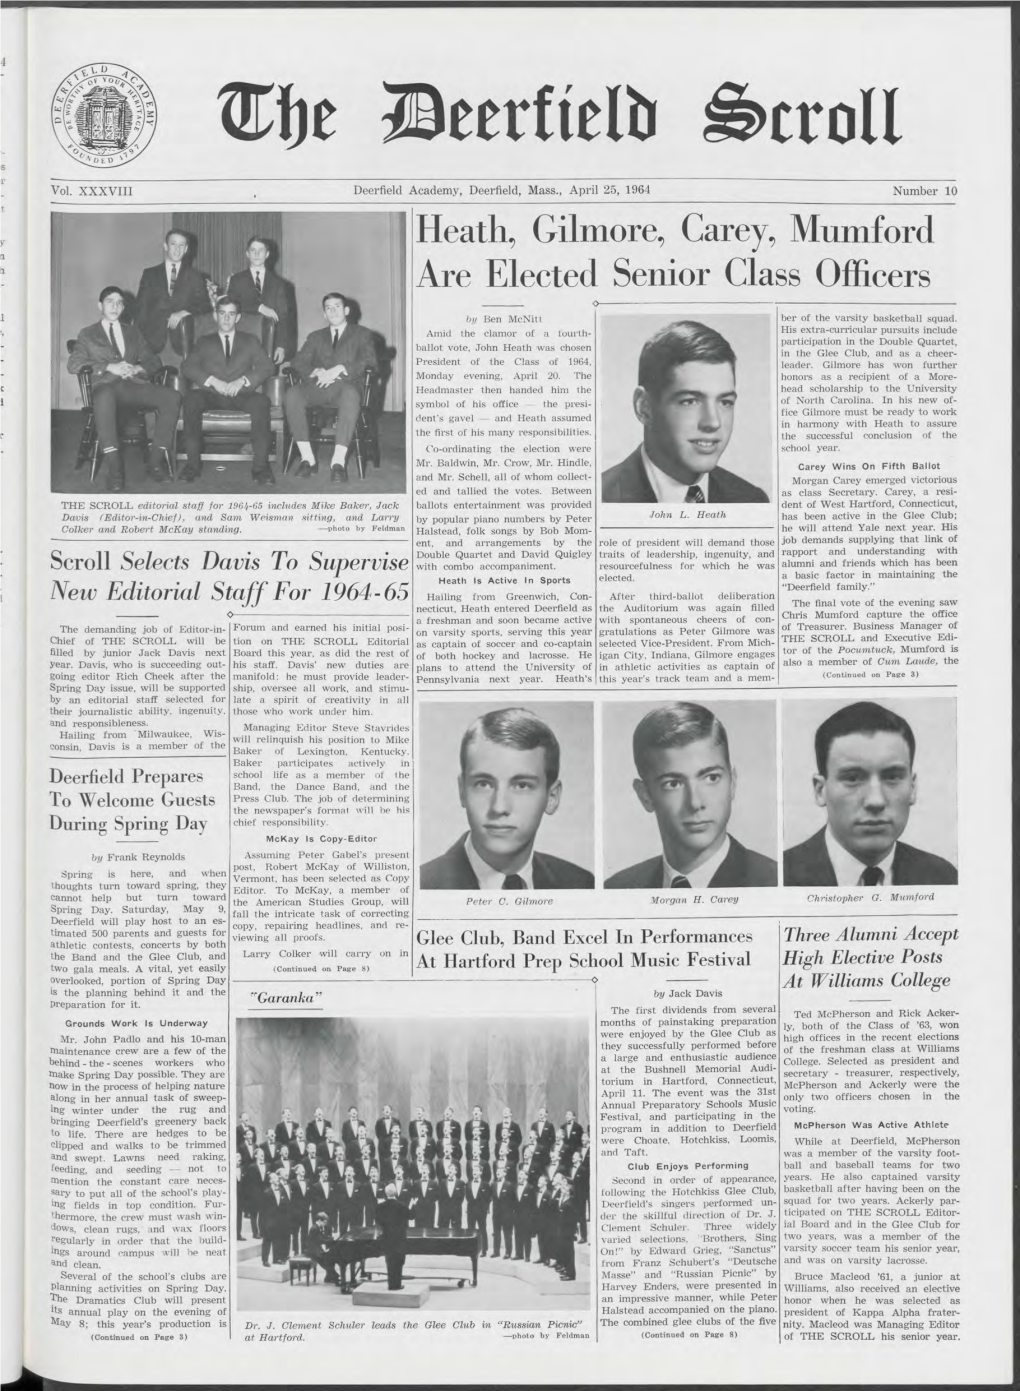 April 25, 1964 Number 10 Heath, Gilmore, Carey, Mumford Are Elected Senior Class Officers